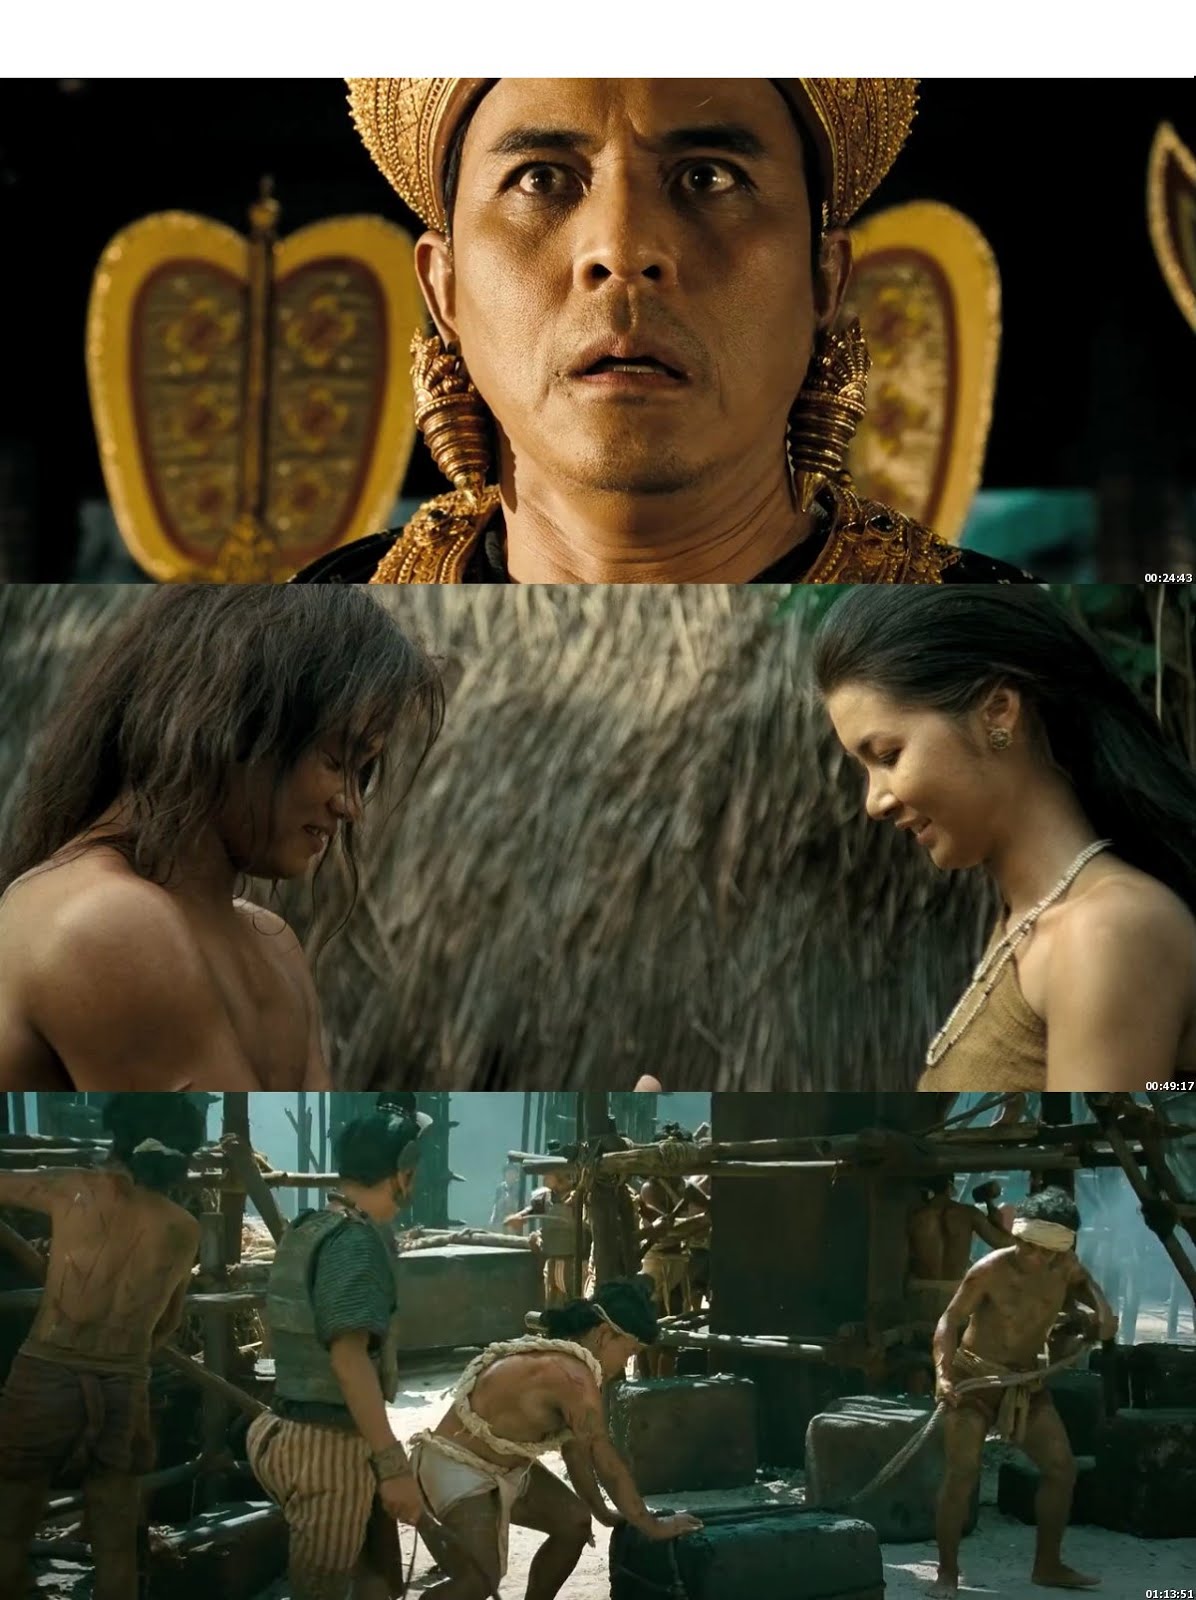 Ong Bak 3 Tamil Dubbed Movie Download